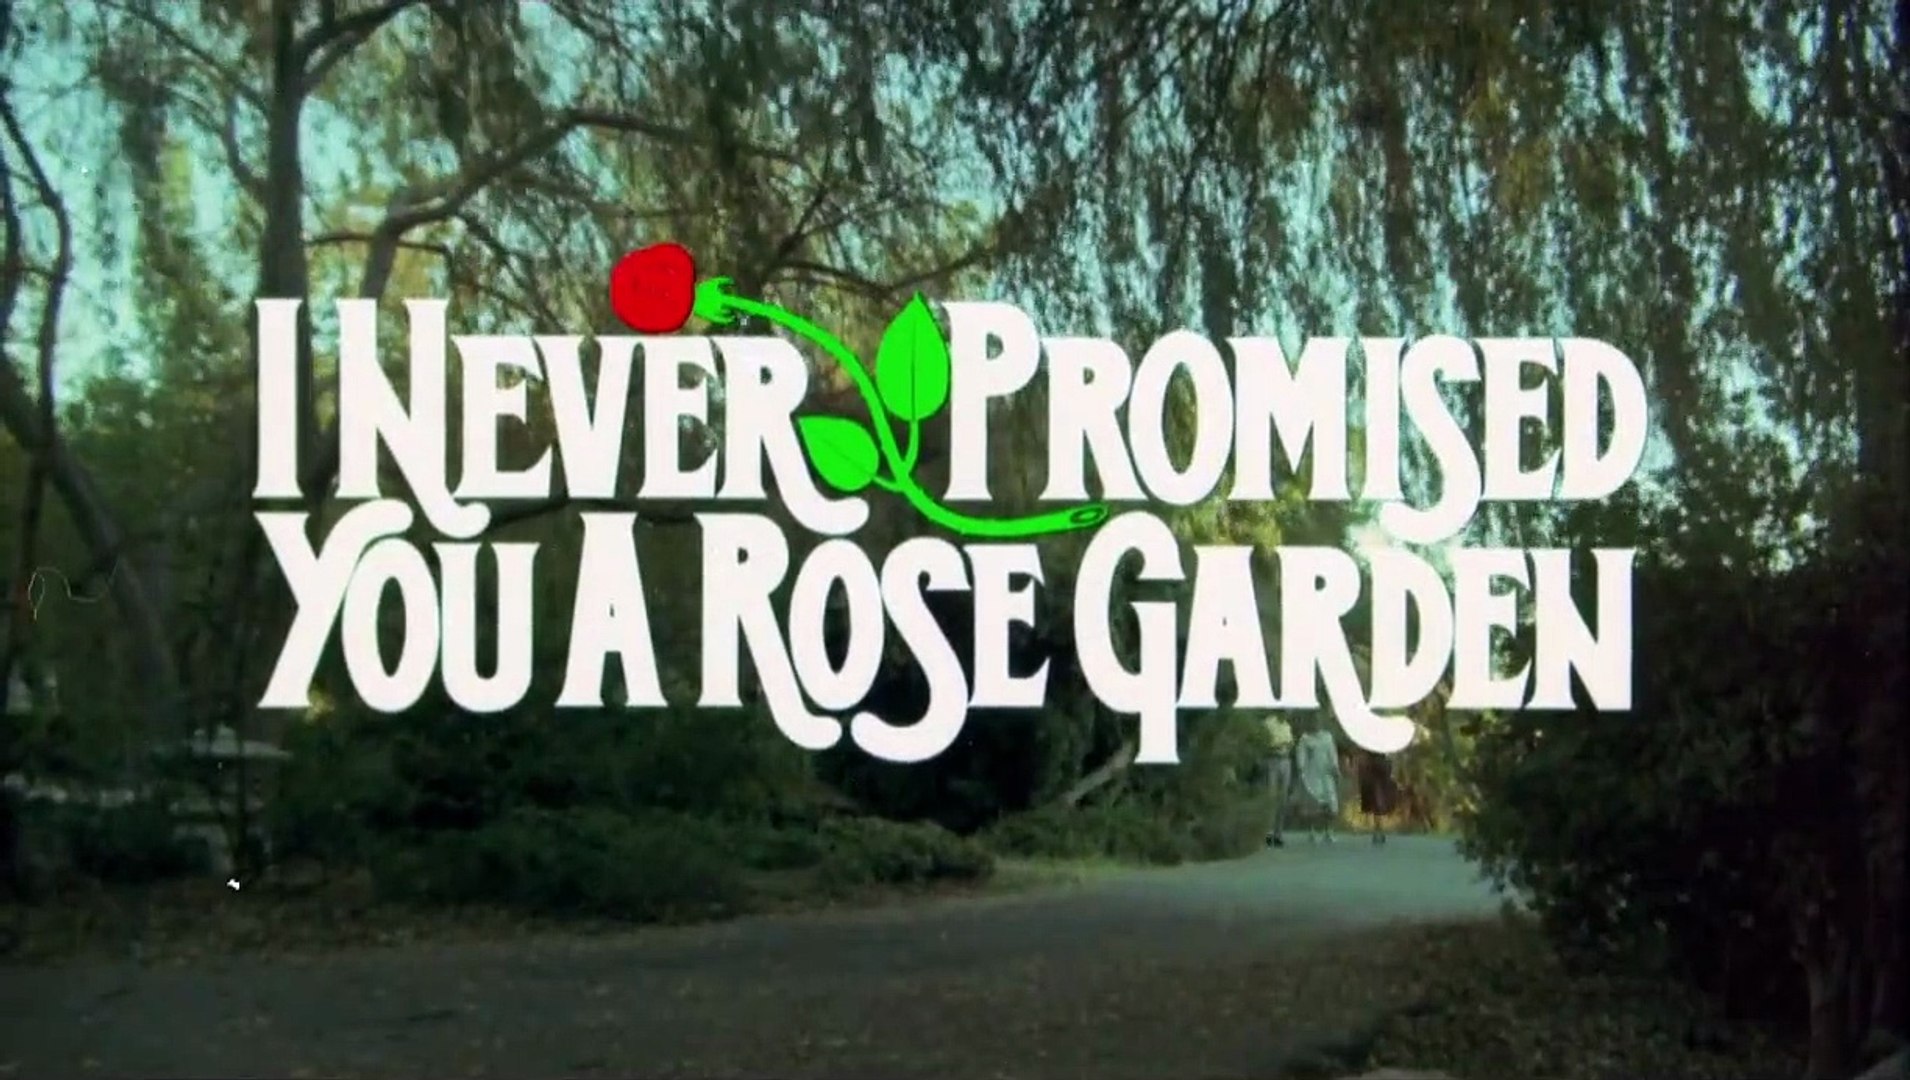 I Never Promised You A Rose Garden Fragman - Dailymotion Video